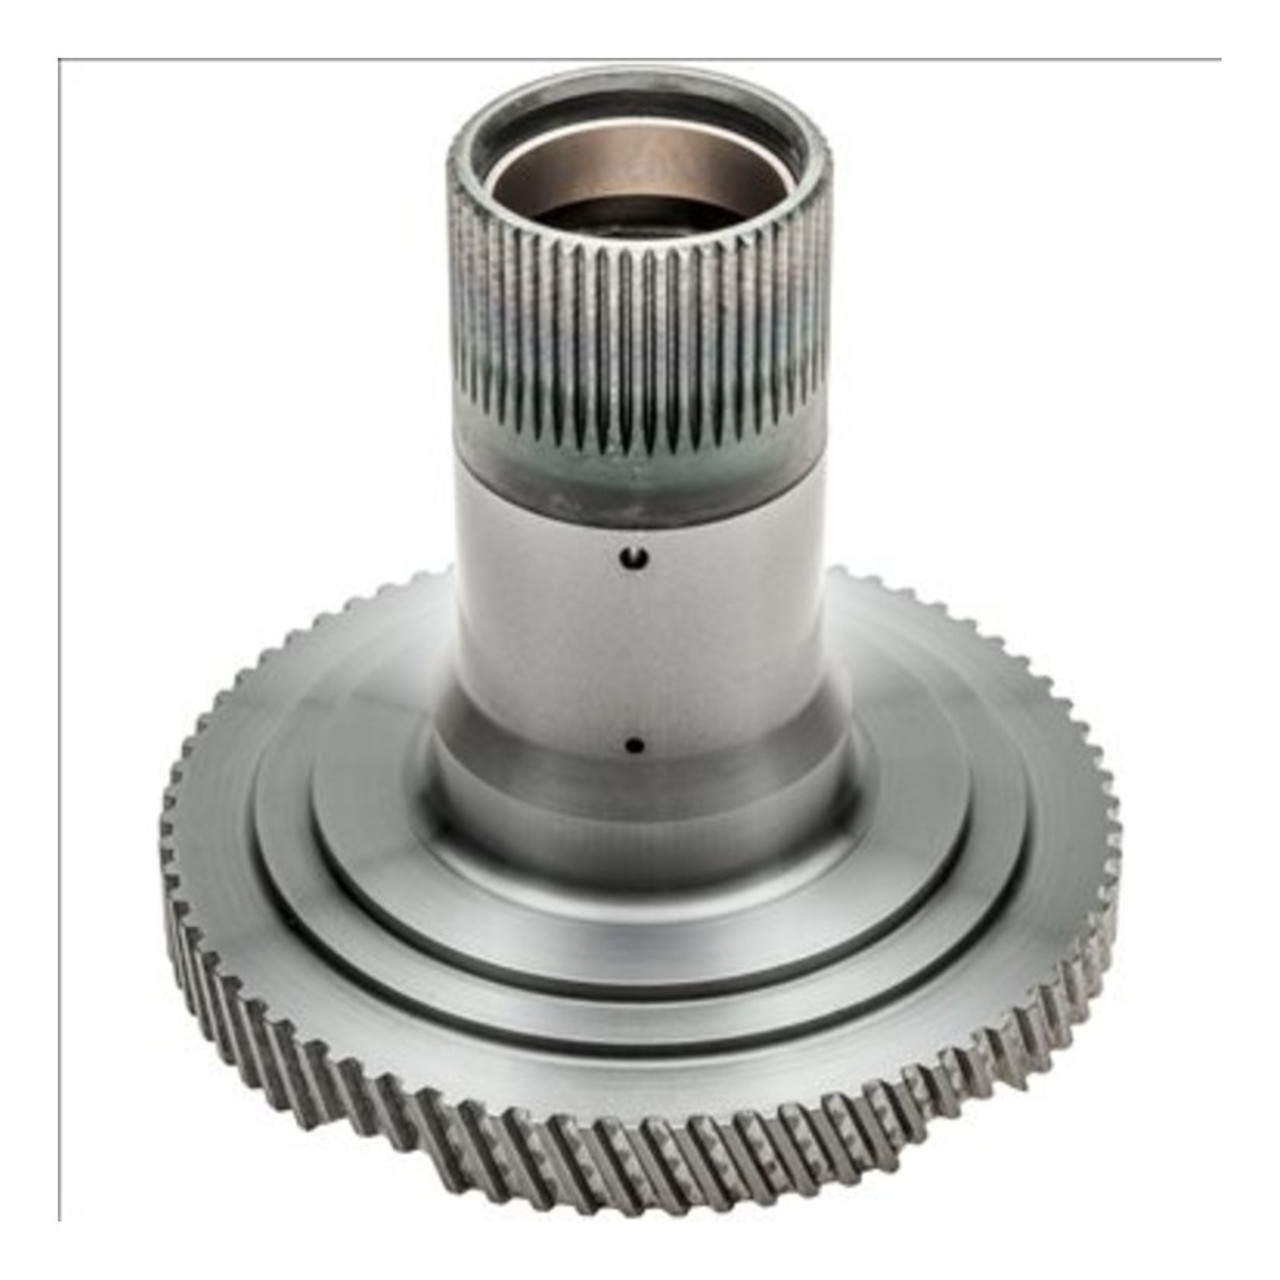 This is a new late bearing style front reaction shaft for GM's 4L60E, 4L65E and 4L70E automatic transmissions manufactured from 2001 to 2006.